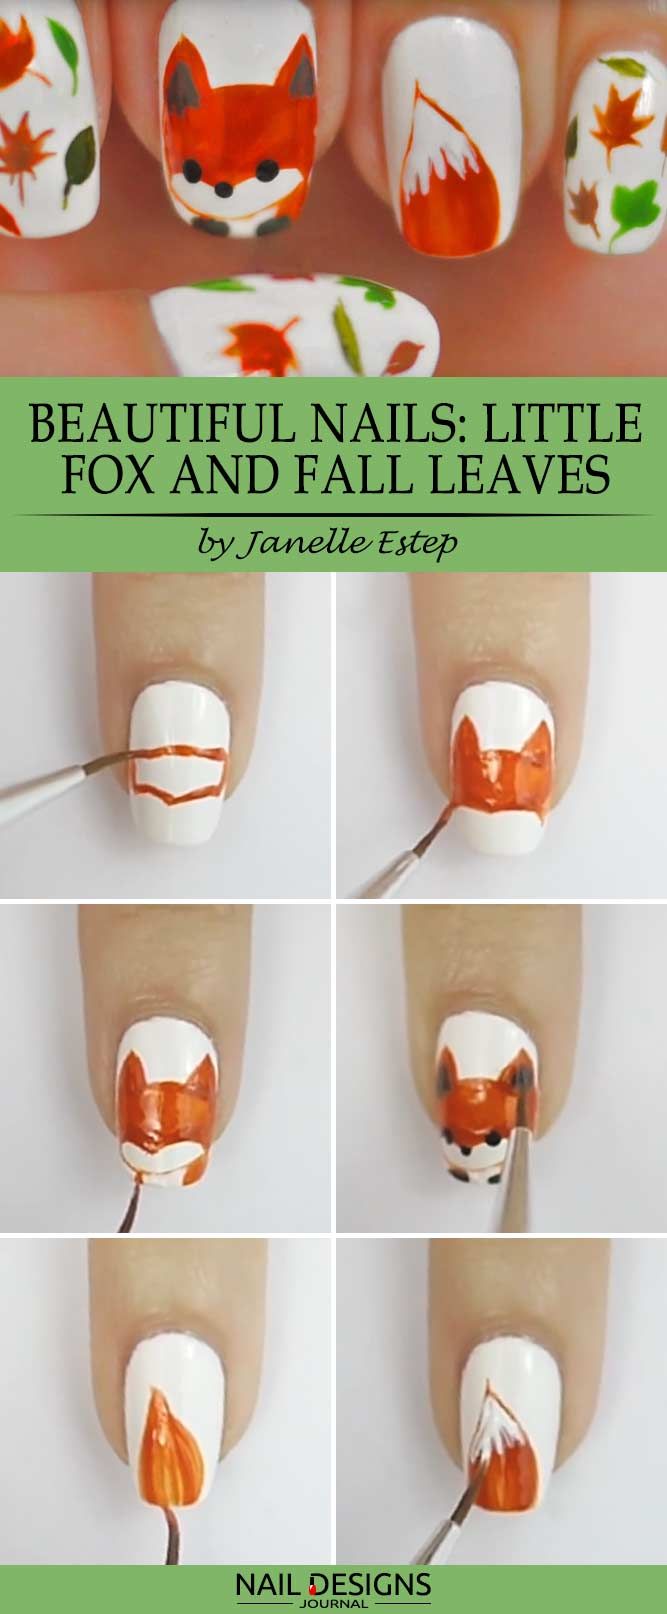 Foxy Nails: The Hottest Trend of This Fall